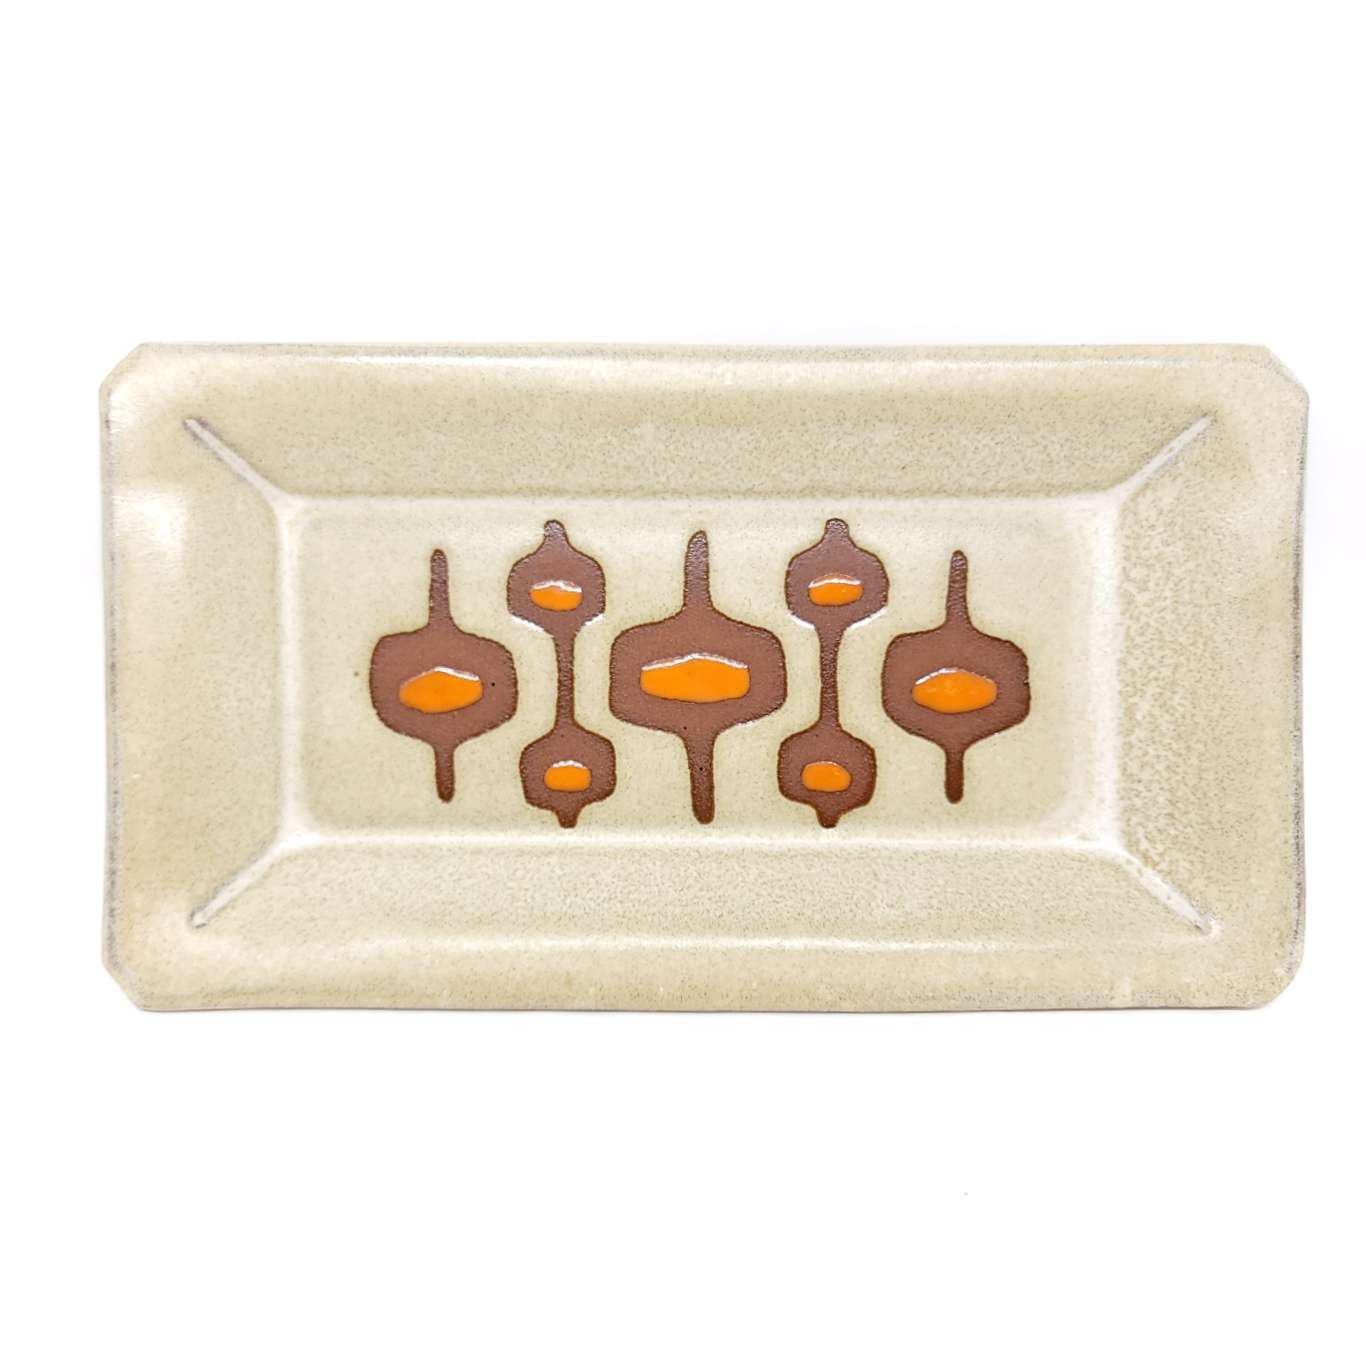 Tray - Mid-Century Modern in Sand and Orange by Fern Street Pottery